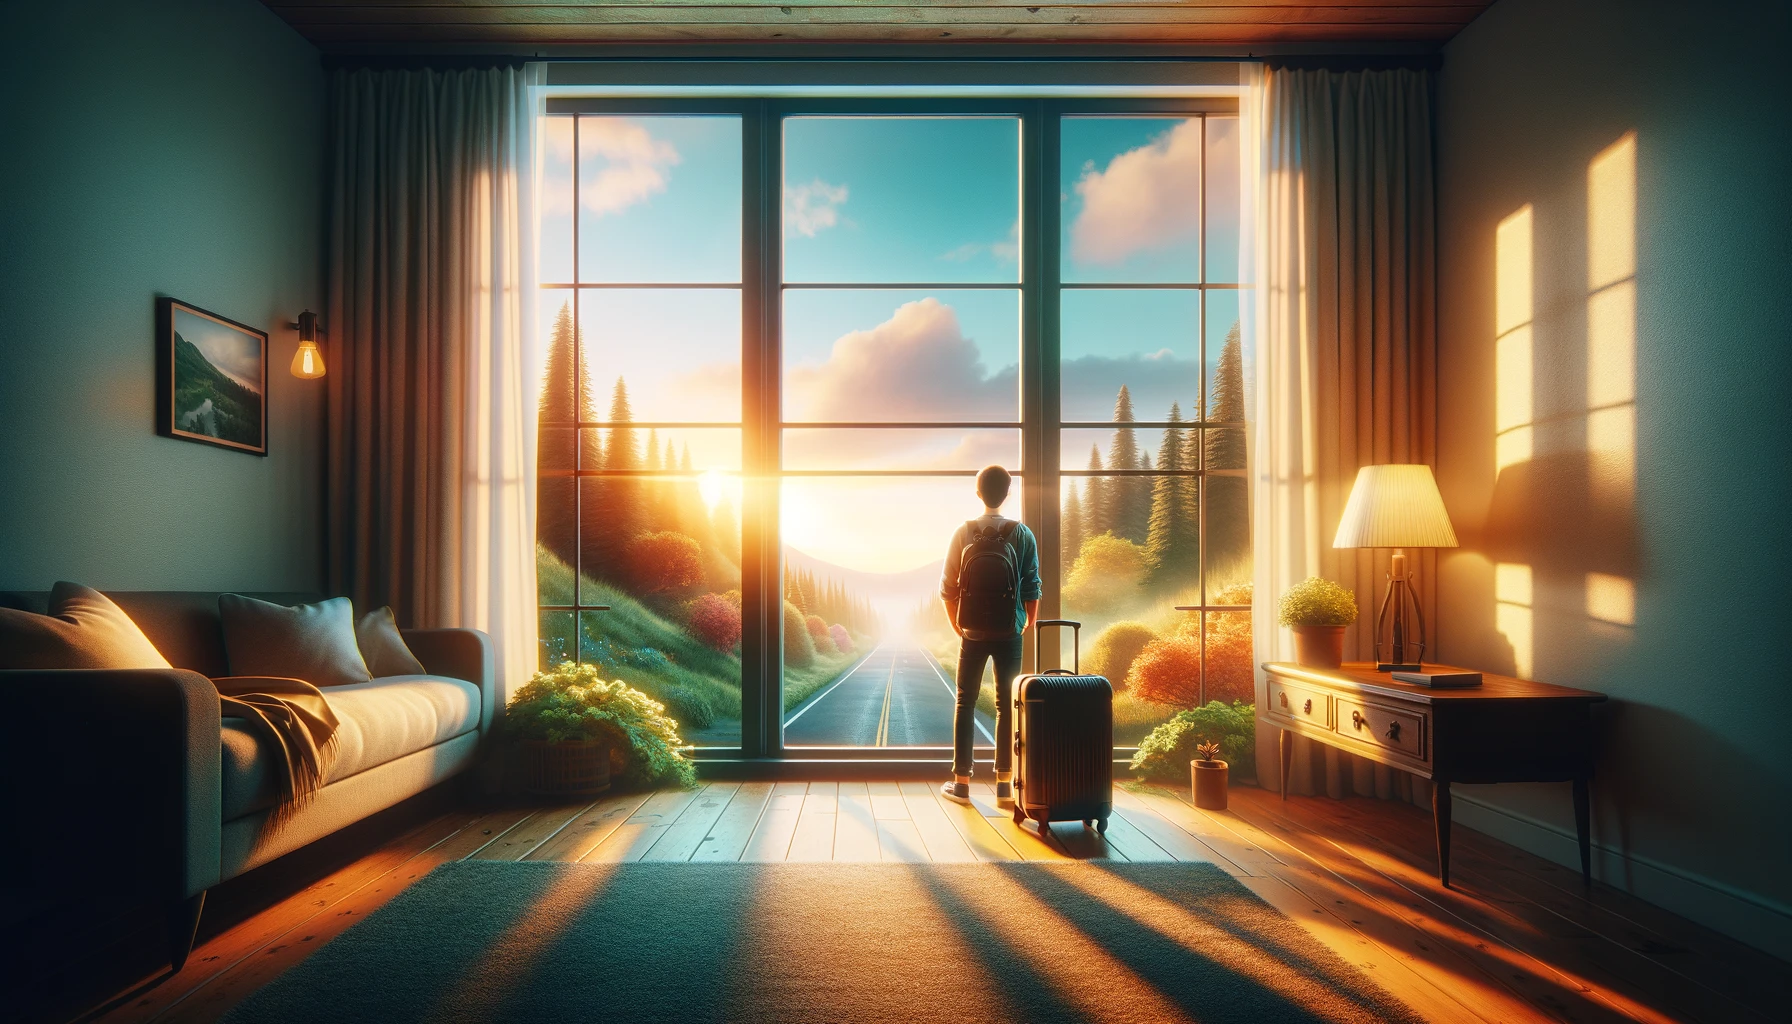 Person looking out of a window beside a suitcase, symbolizing a new journey, with a vibrant landscape visible outside, representing the excitement and possibilities of moving to a new state.